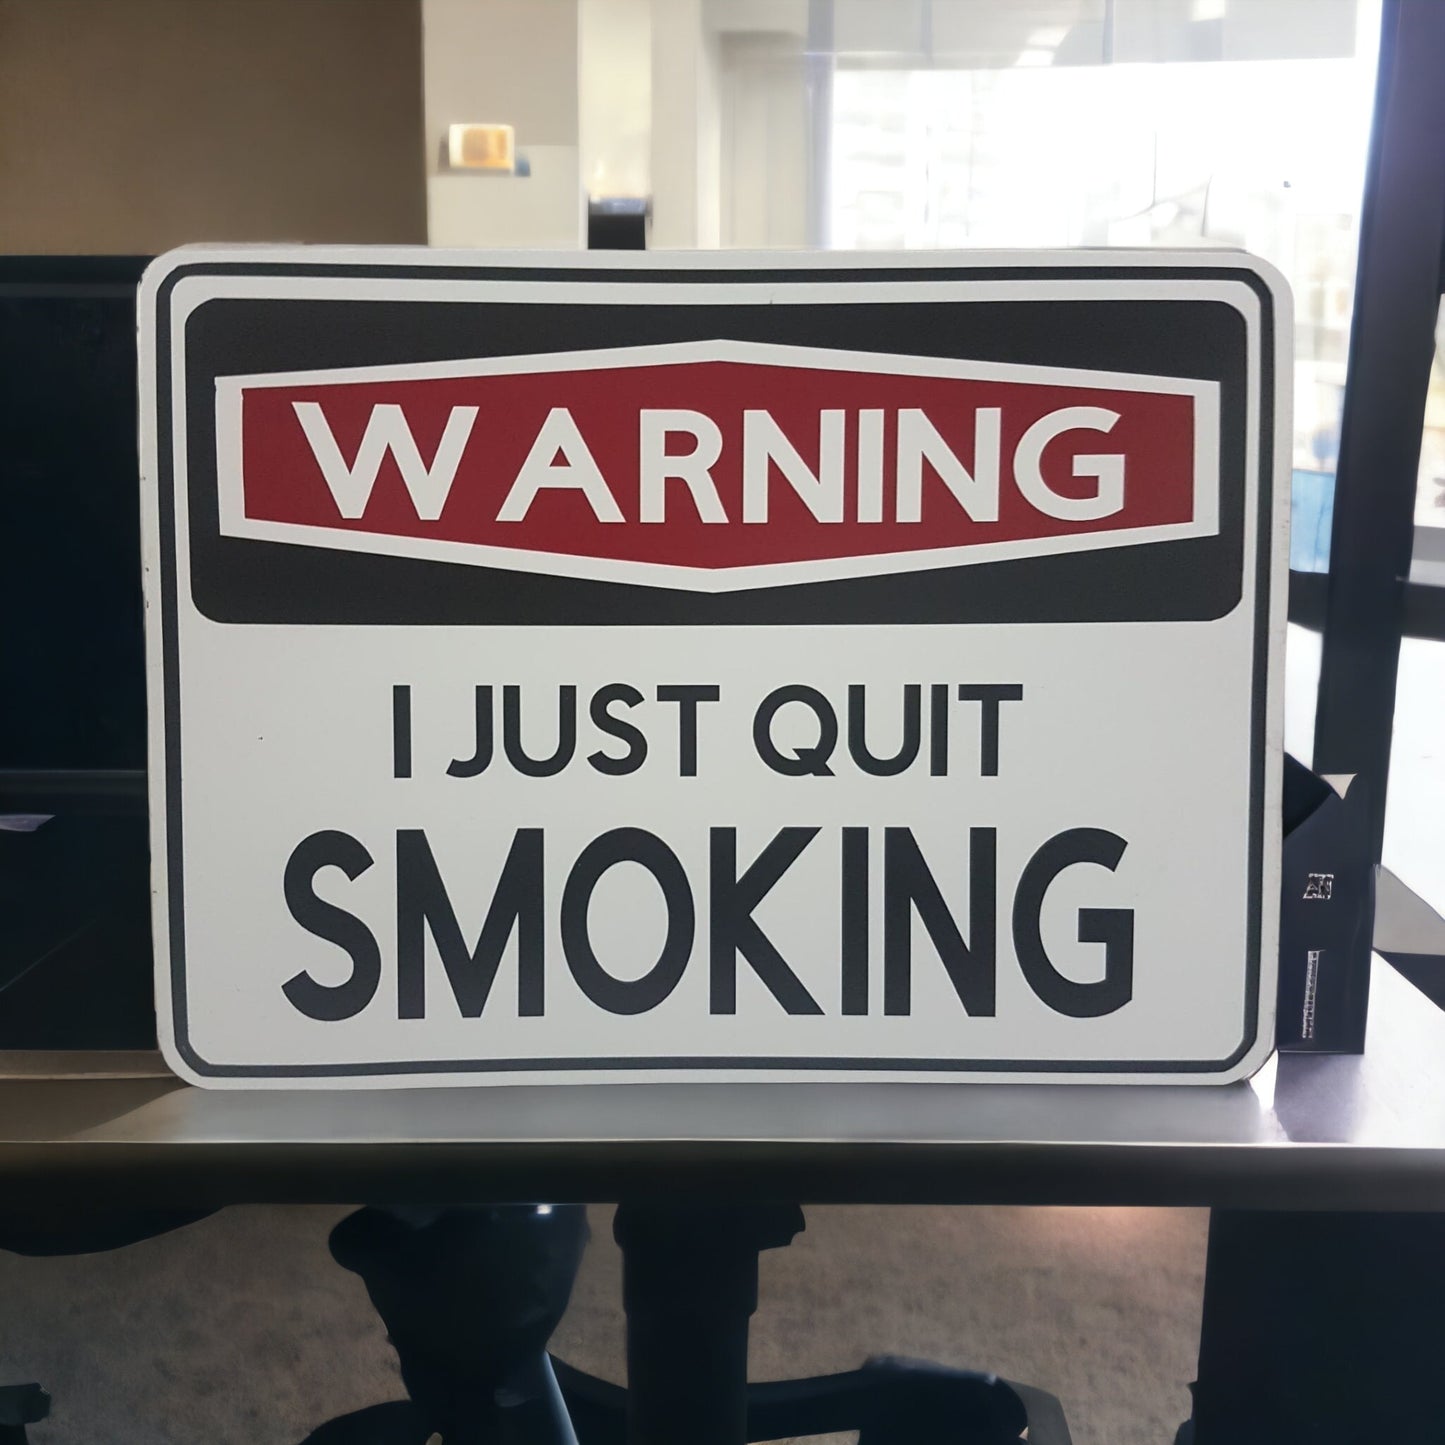 Here is a really cute sign for that person who has quit smoking and could use a little space